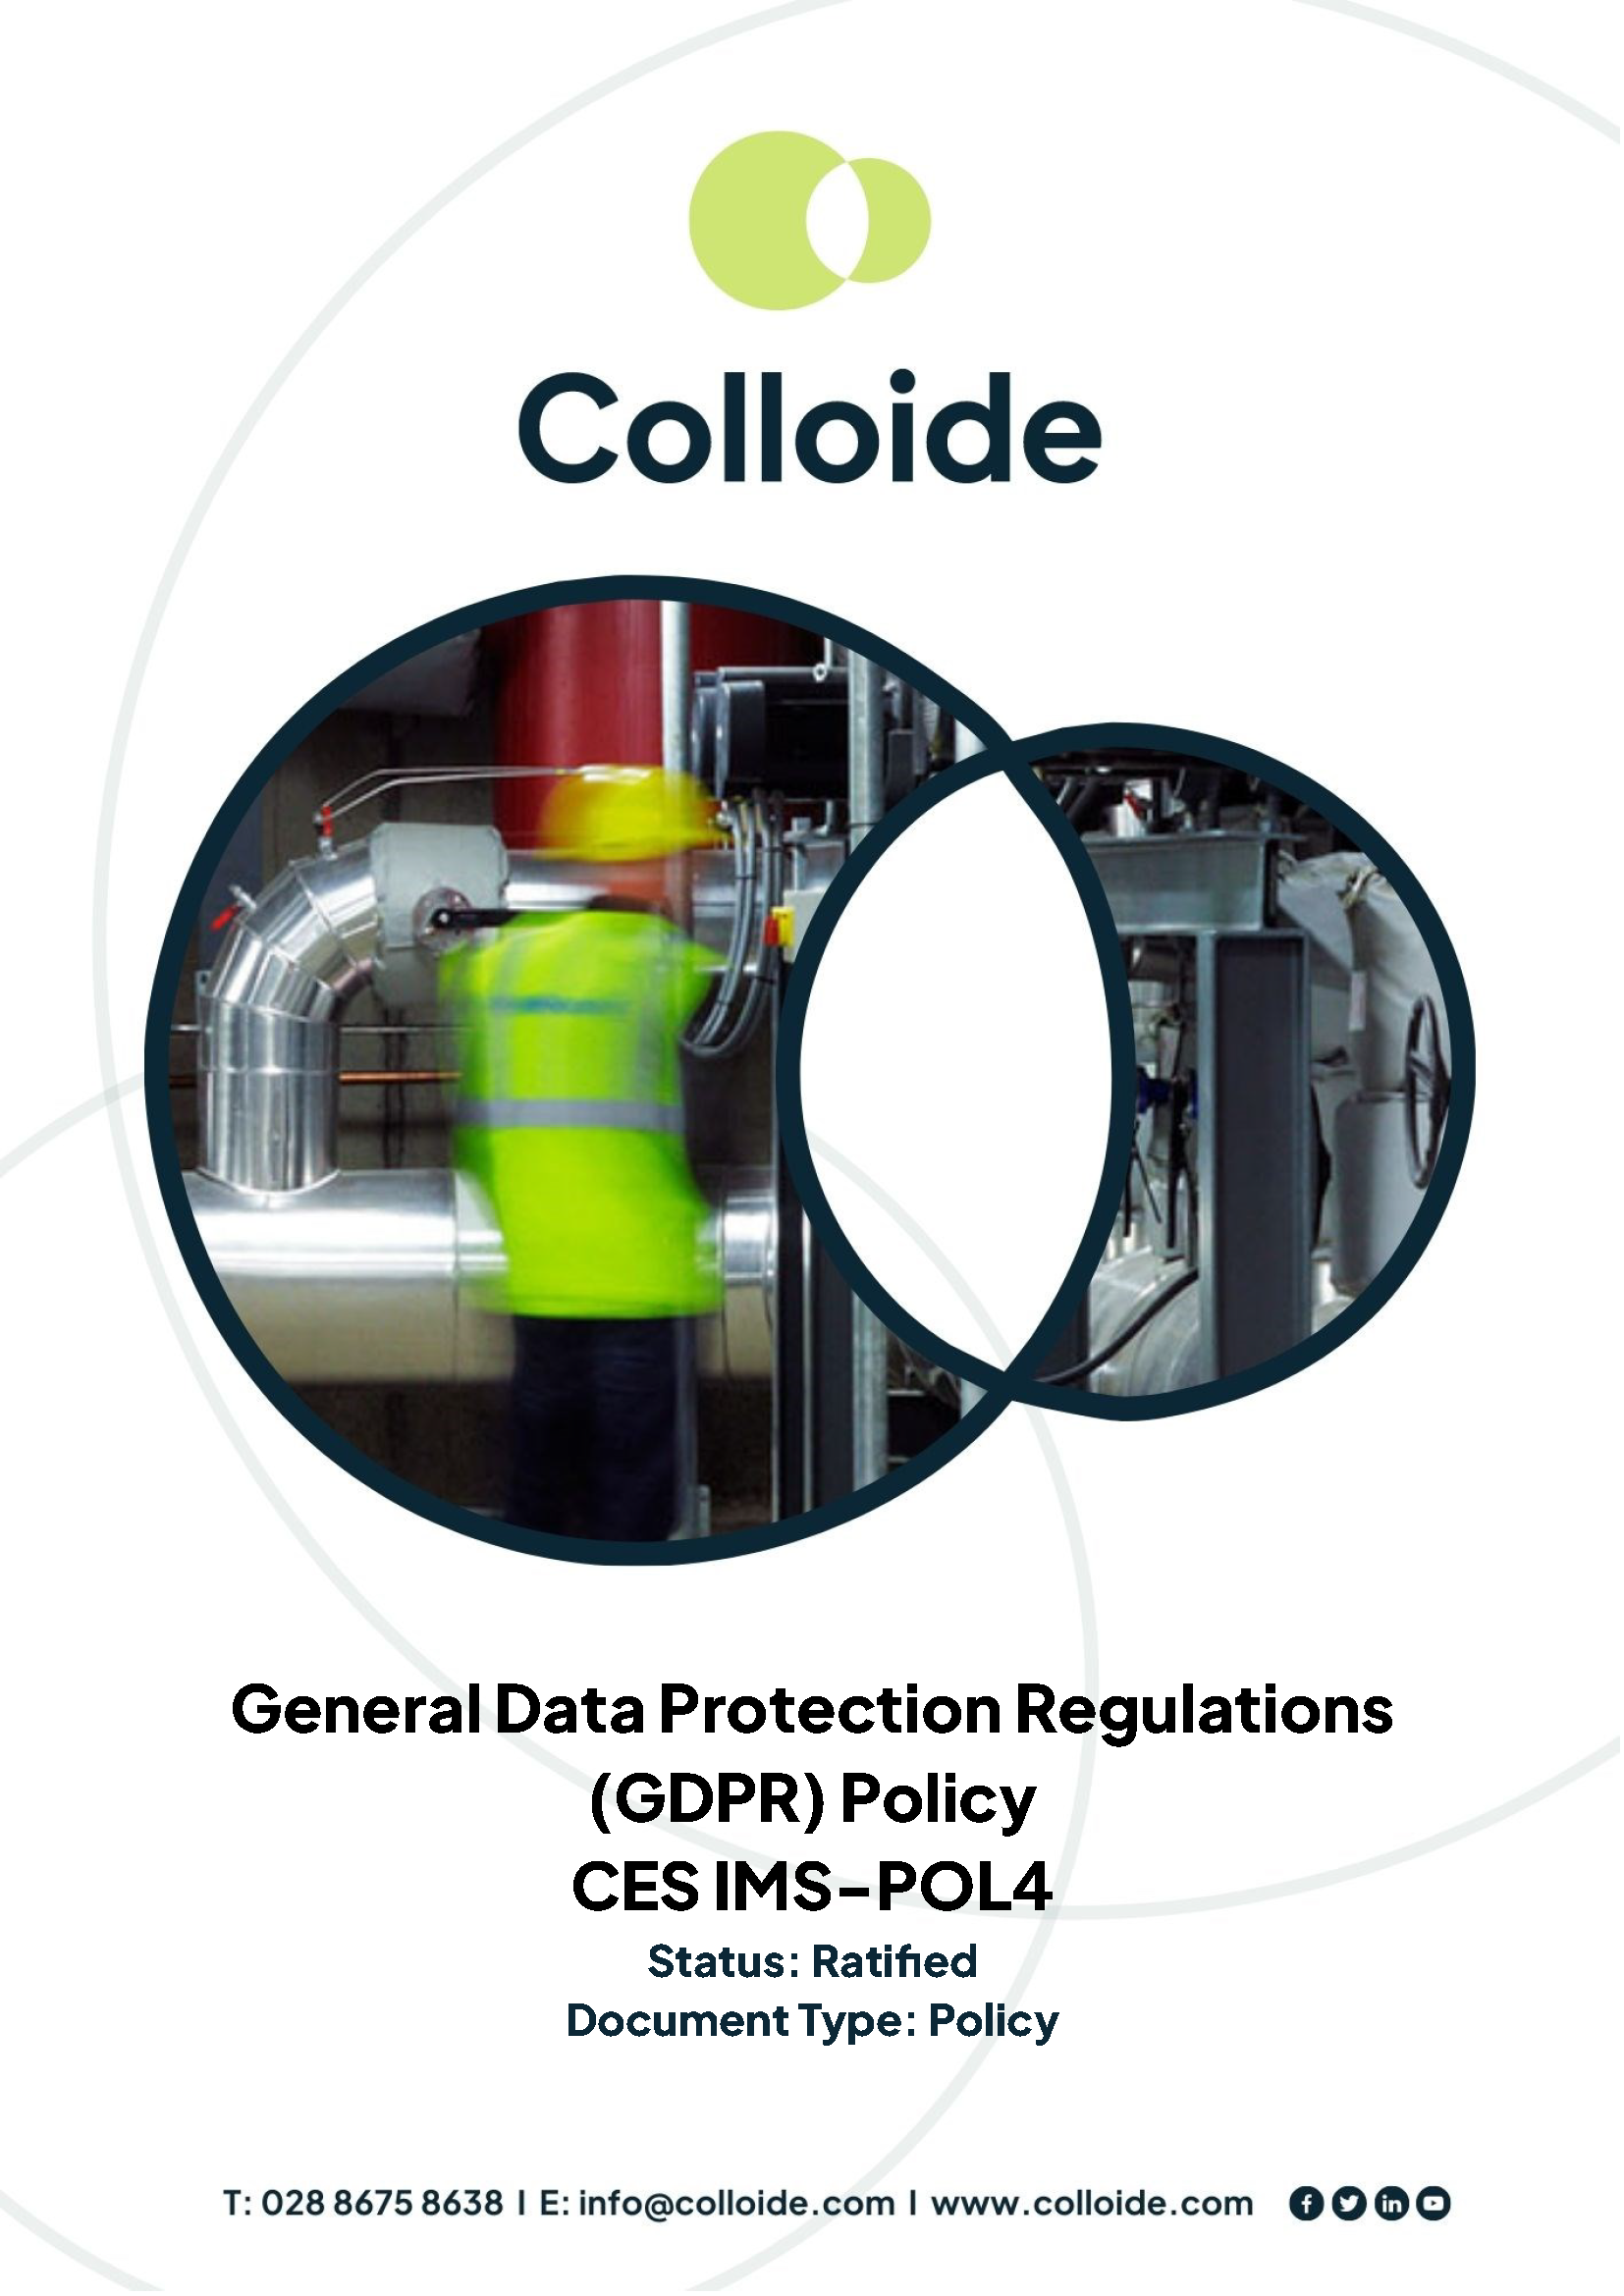 Cover Image for CES IMS-POL4 – General Data Protection Regulations (GDPR) Policy